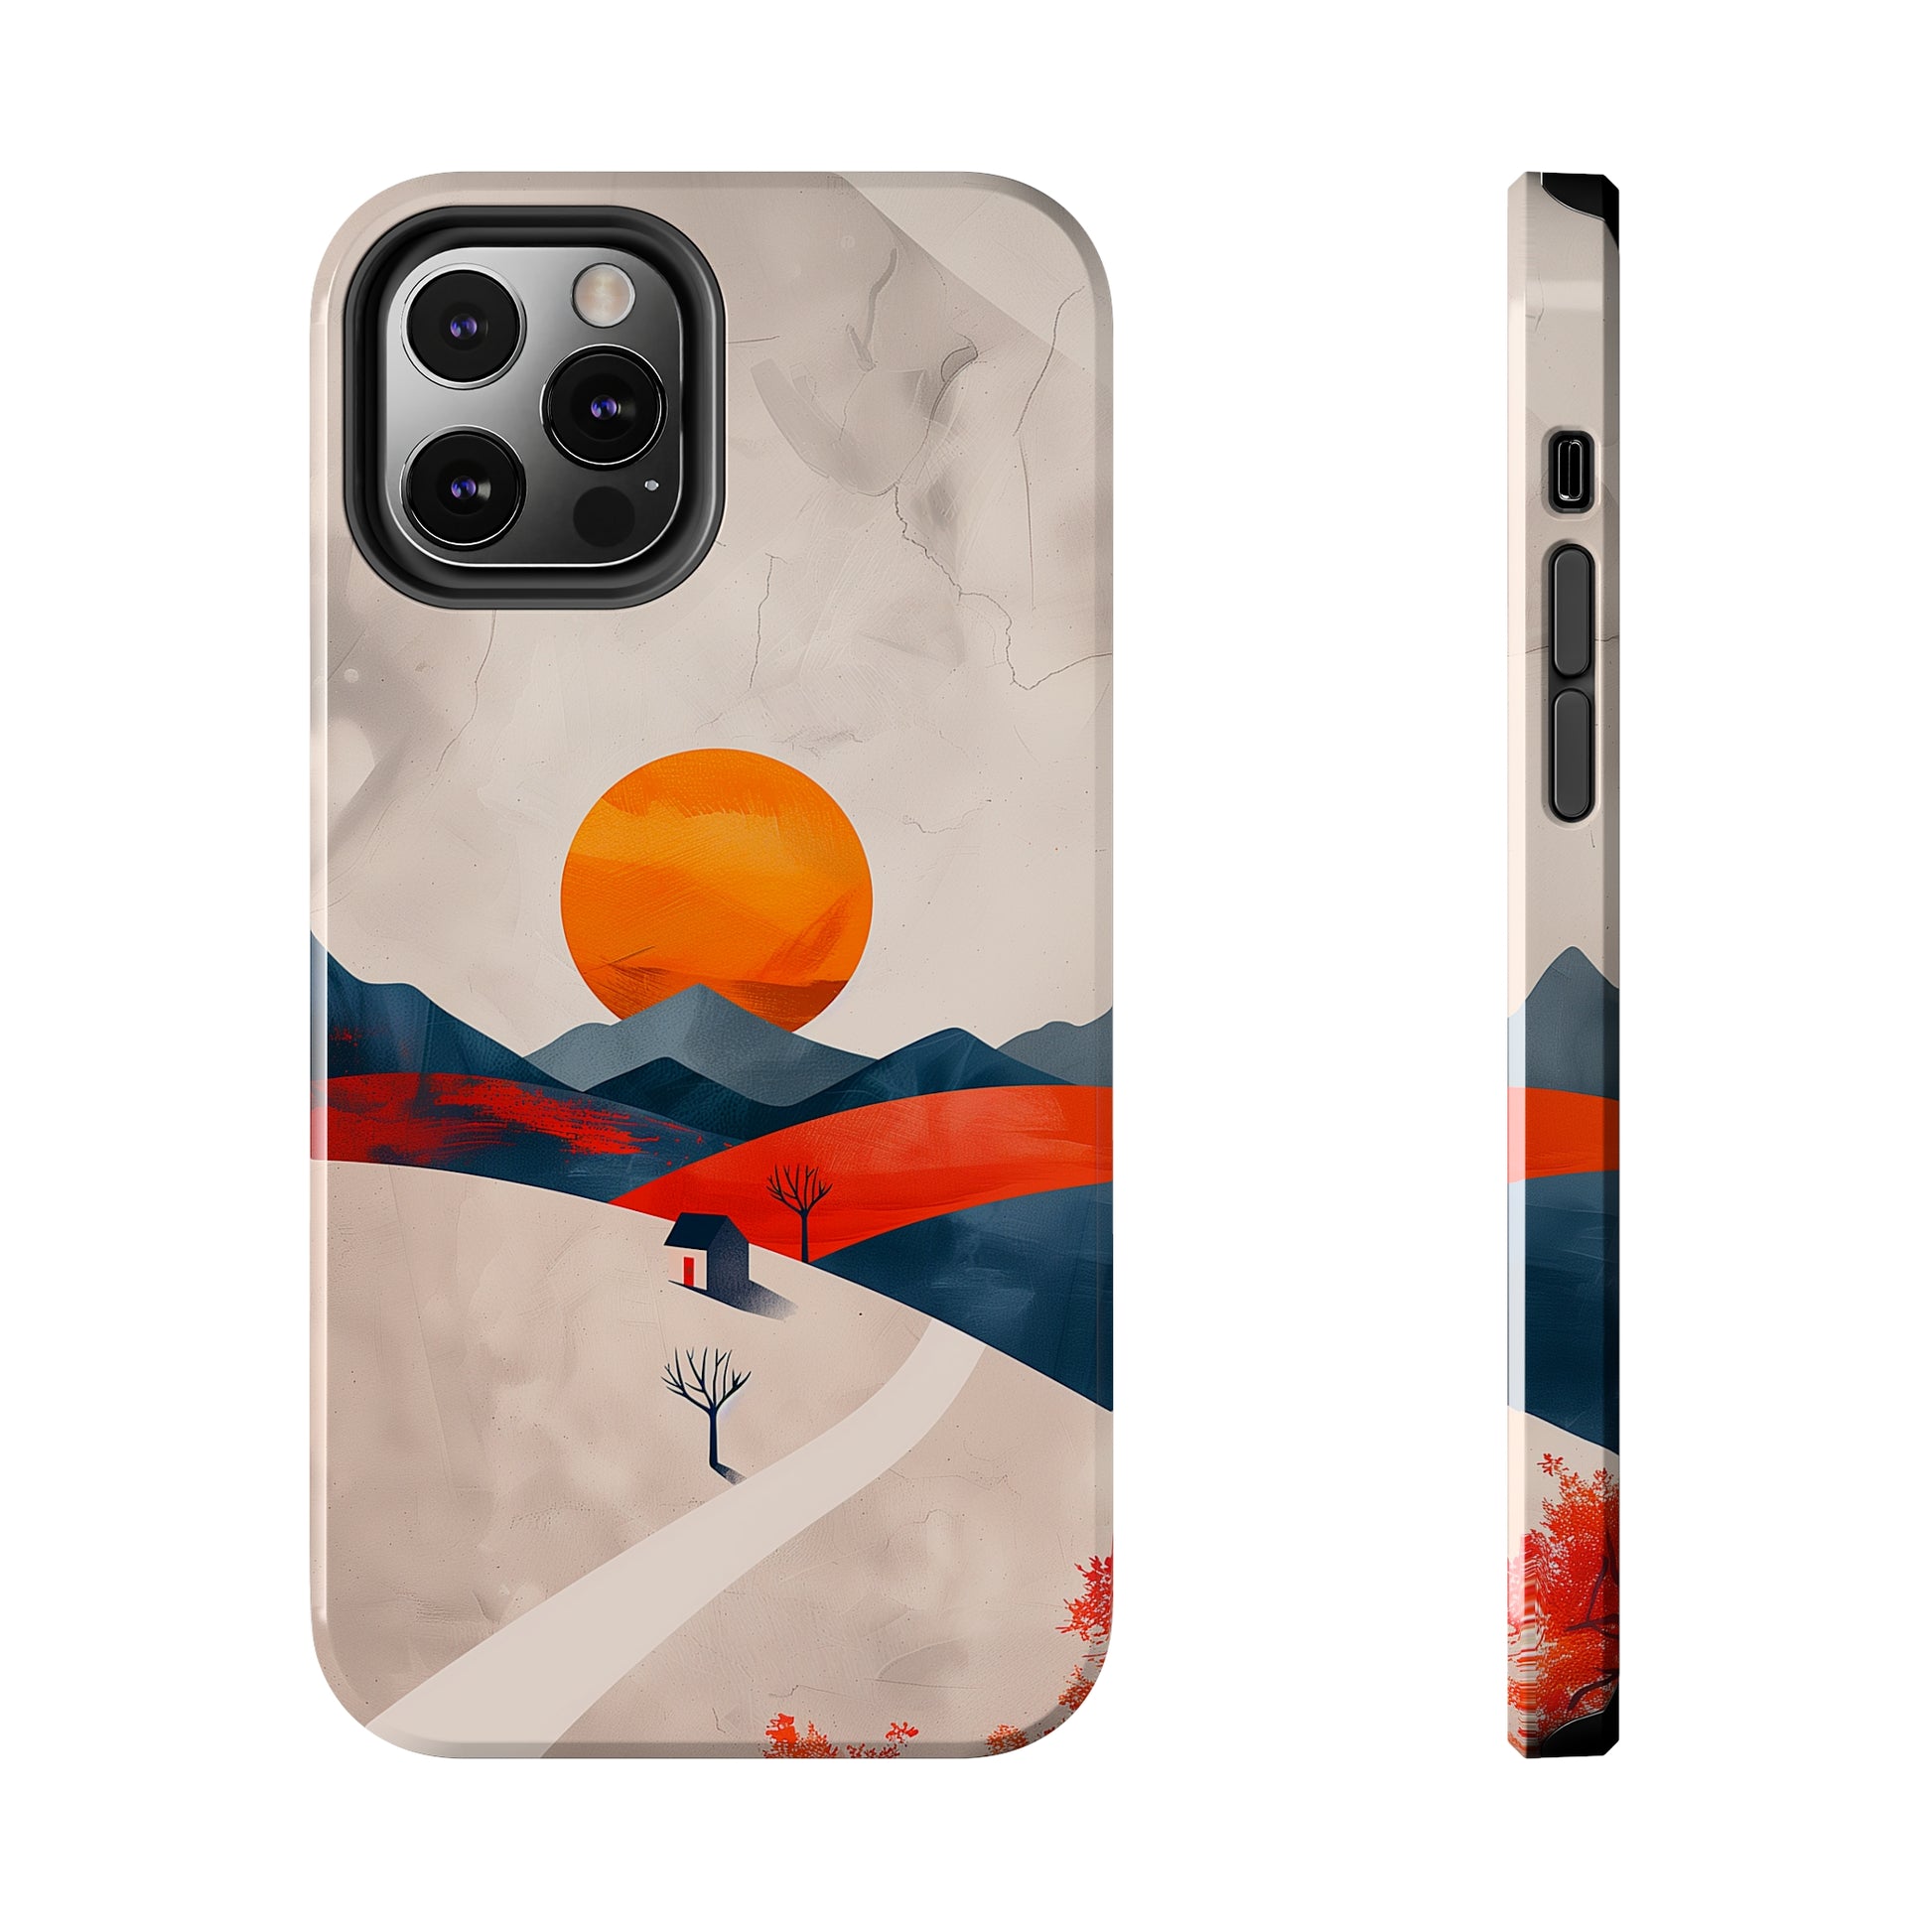 Amber Awakening (iPhone Case 11-15)Shop RIMA Tough Phone Case for iPhone 11-15: Ultimate protection with double-layer defense, glossy finish, and wireless charging compatibility. Urban and weather-resRimaGallery